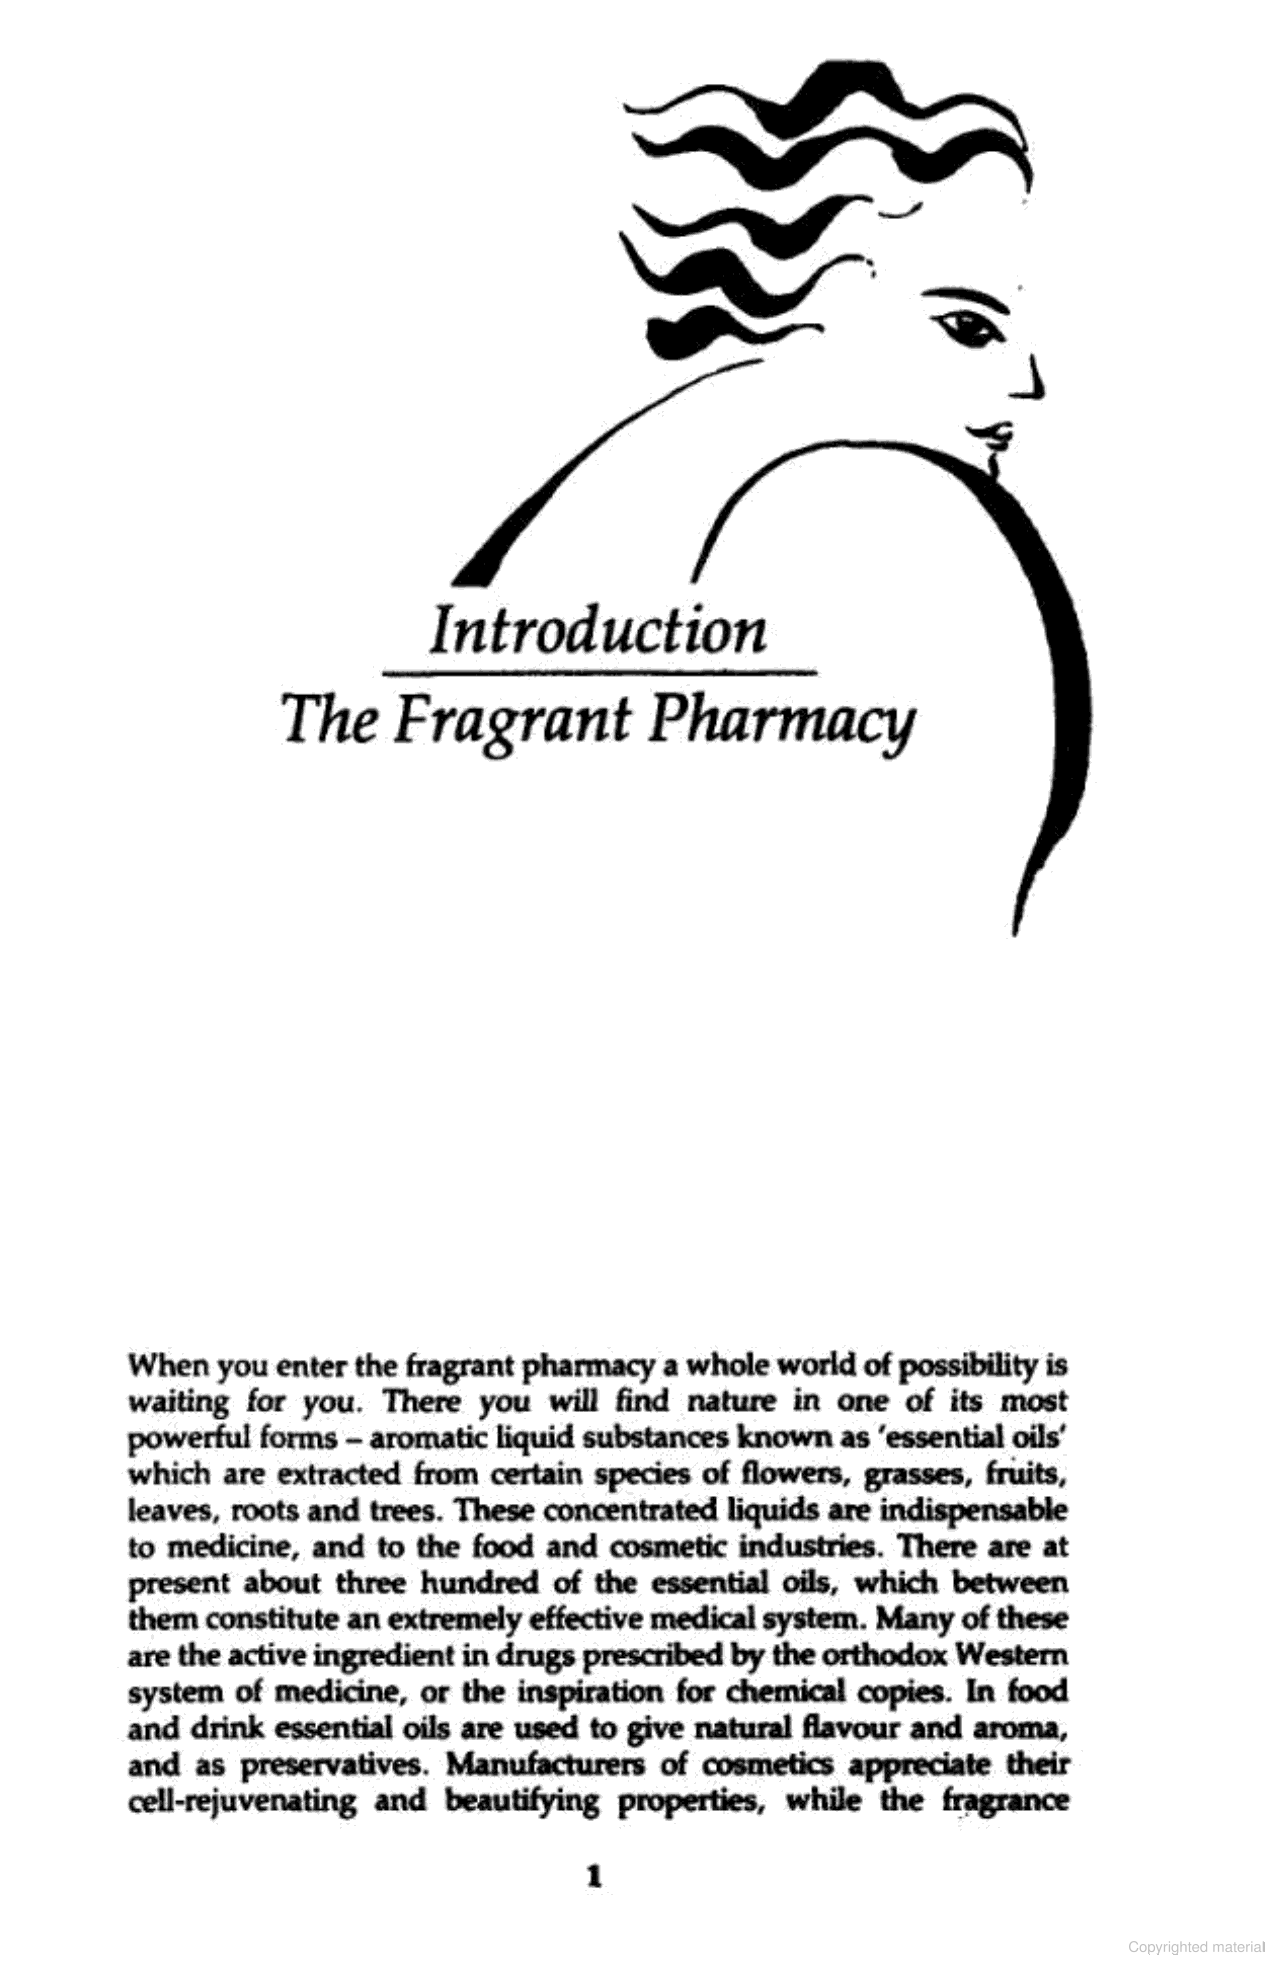 The Fragrant Pharmacy A complete guide to aromatherapy & essential oils